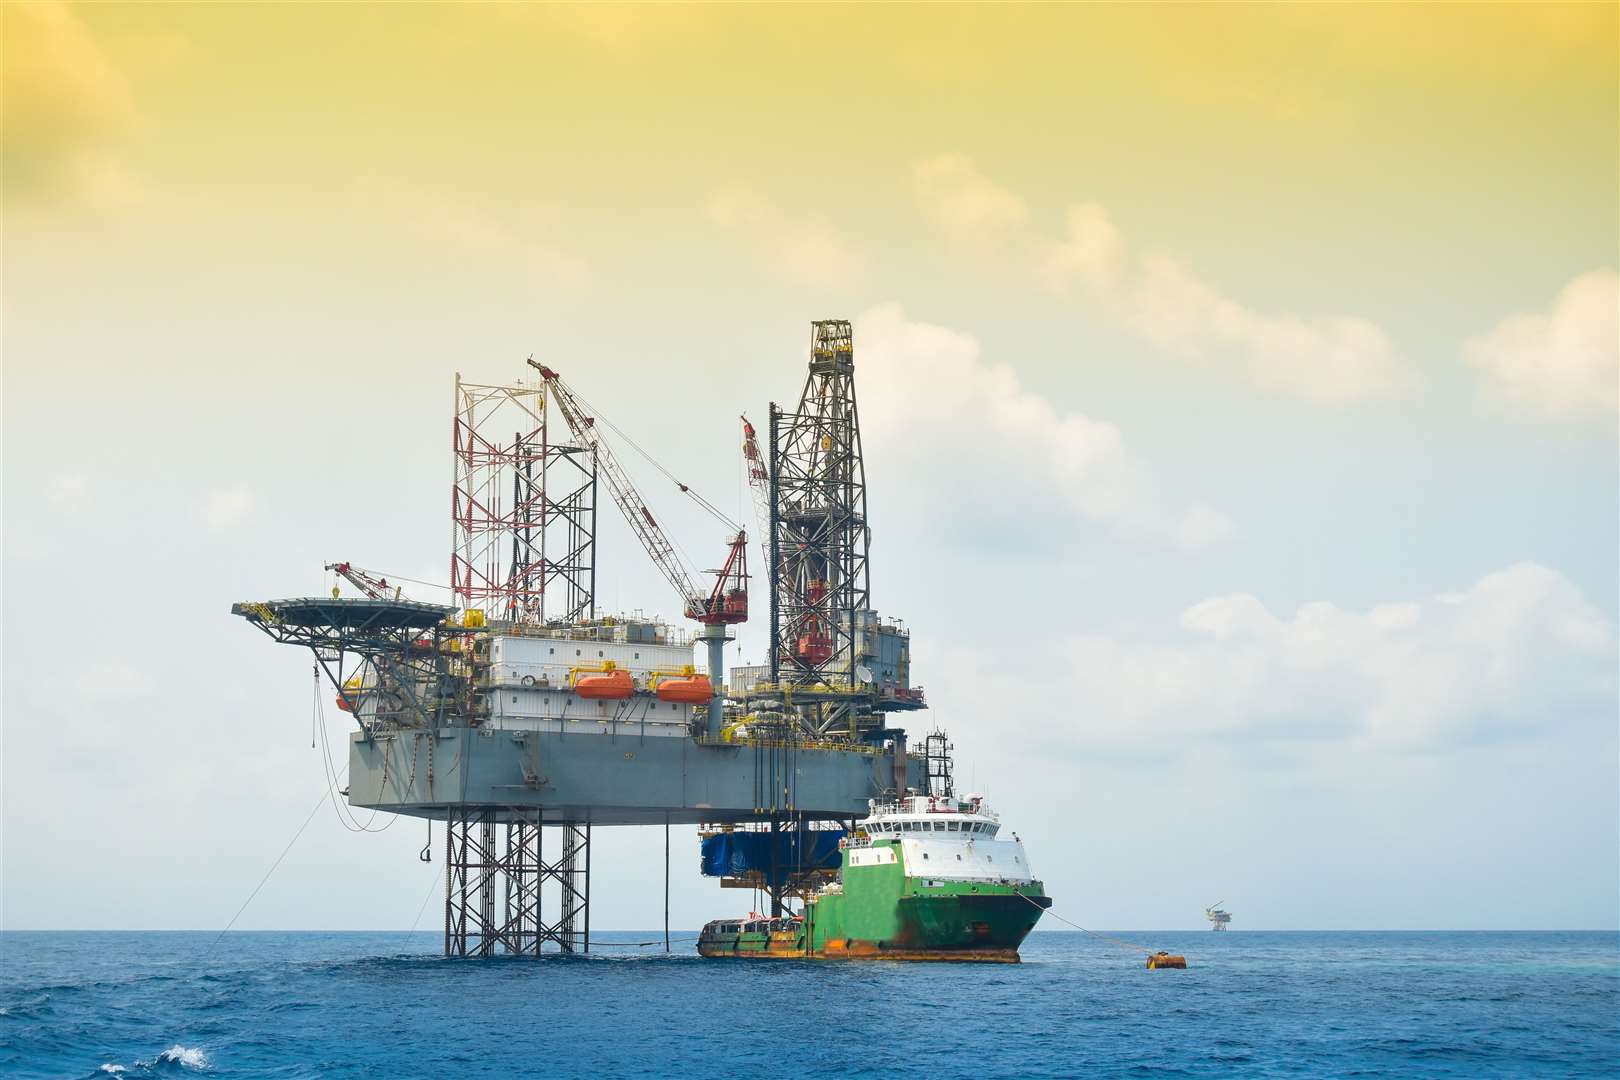 Oil and rig platform operation in north sea, Heavy industry in oil and gas business in offshore, rig operation.